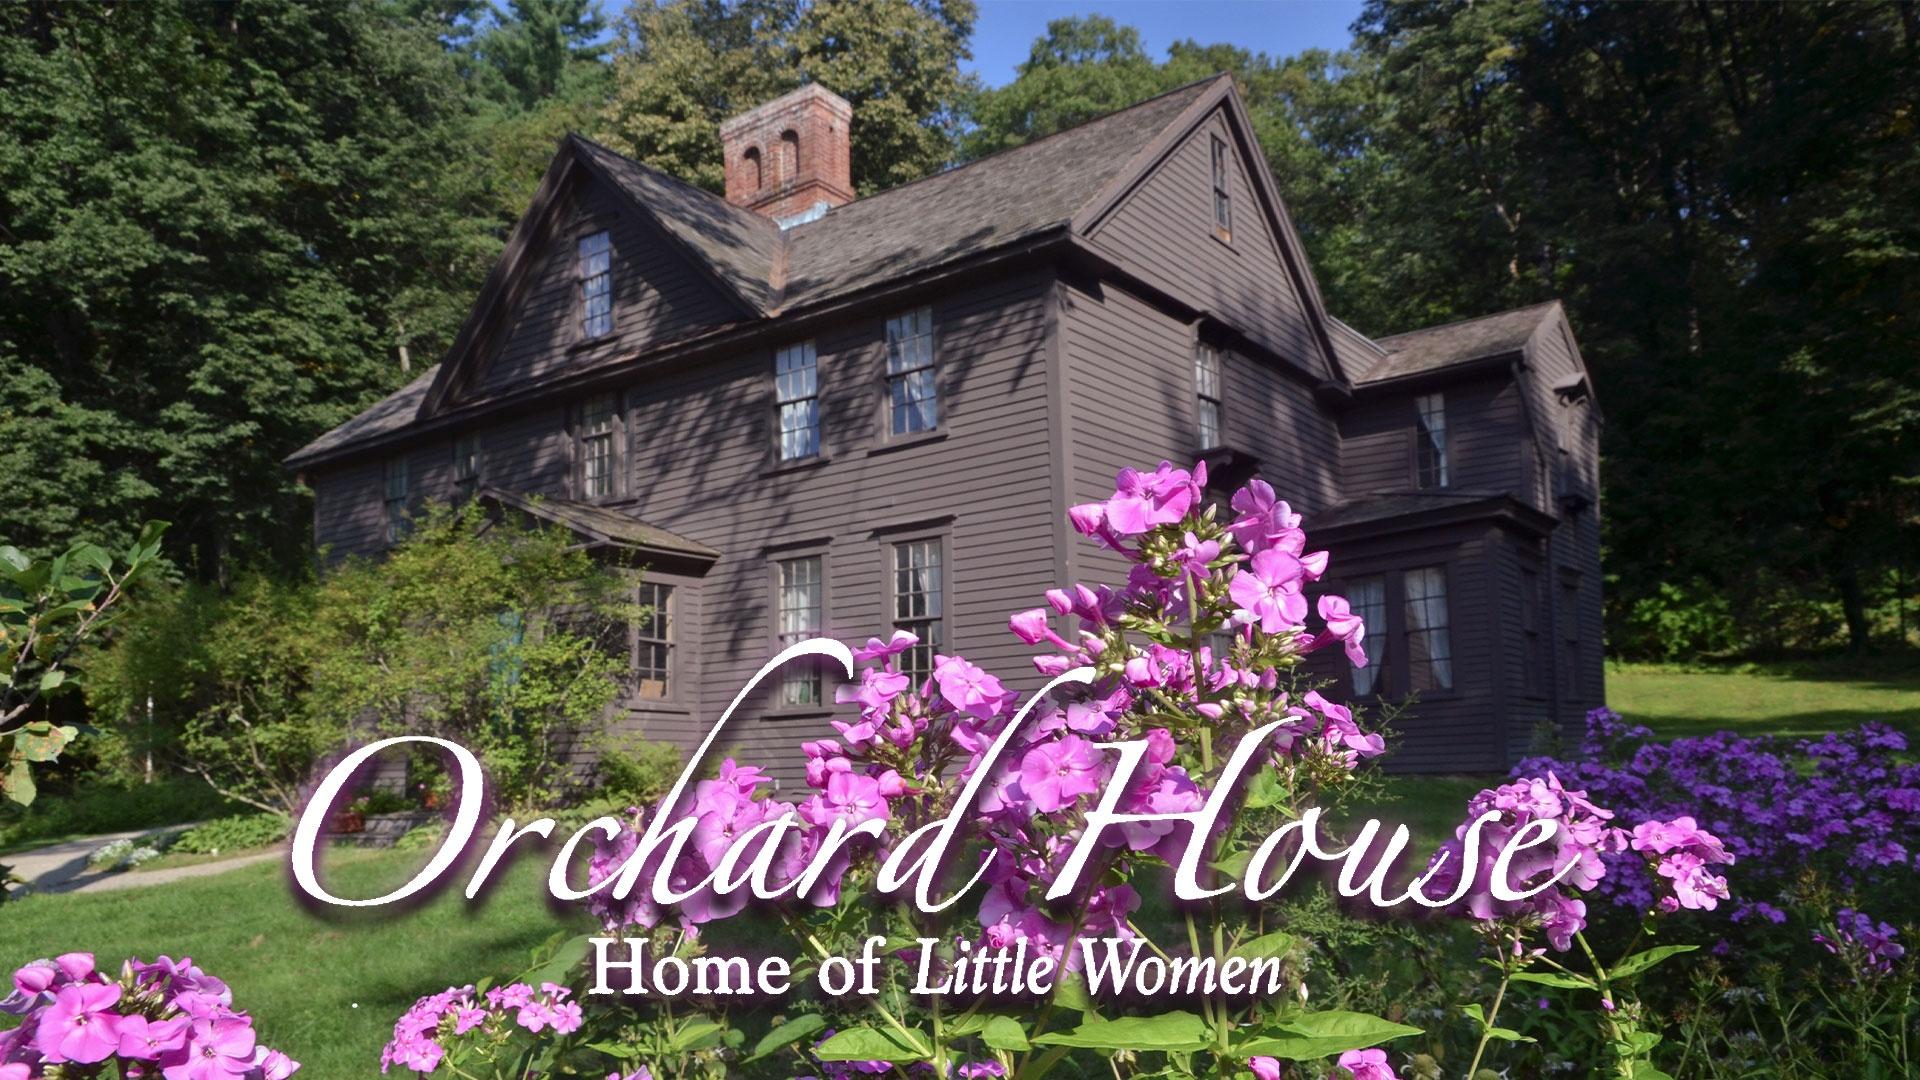 Orchard House: The Home of Little Women